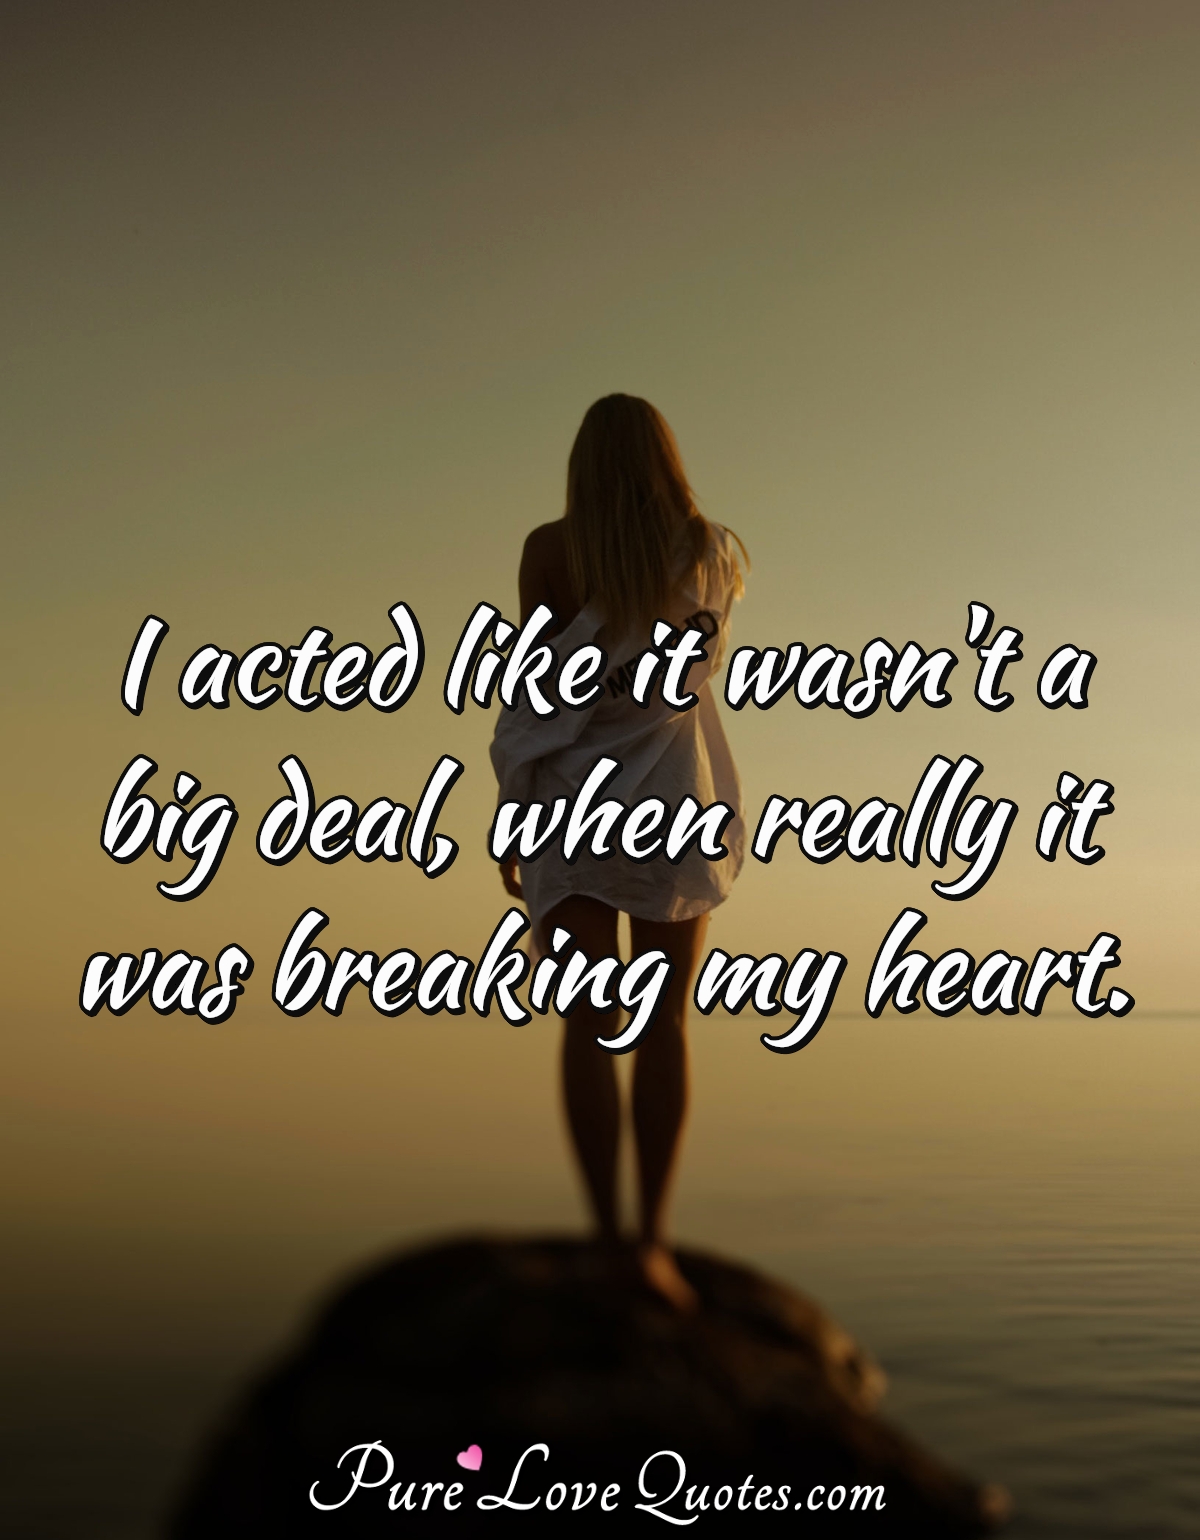 I acted like it wasn't a big deal, when really it was breaking my heart. - Anonymous